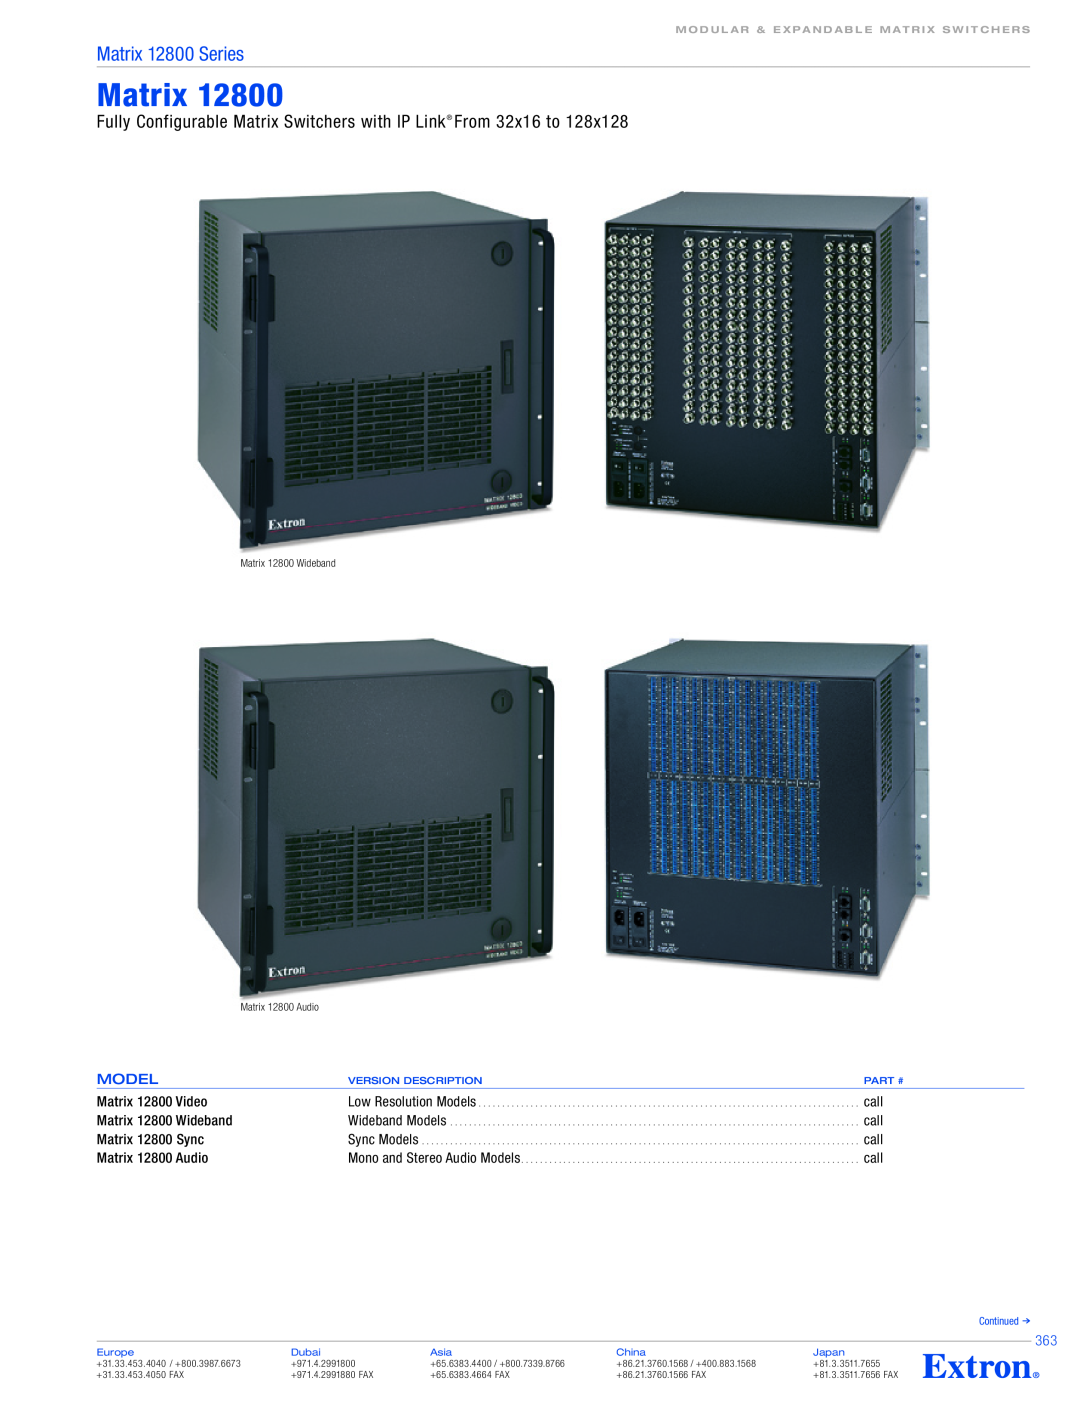 Extron electronic Matrix 12800 Series Fully Configurable Matrix Switchers with IP Link From 32x16 to, Model, call, Audio 